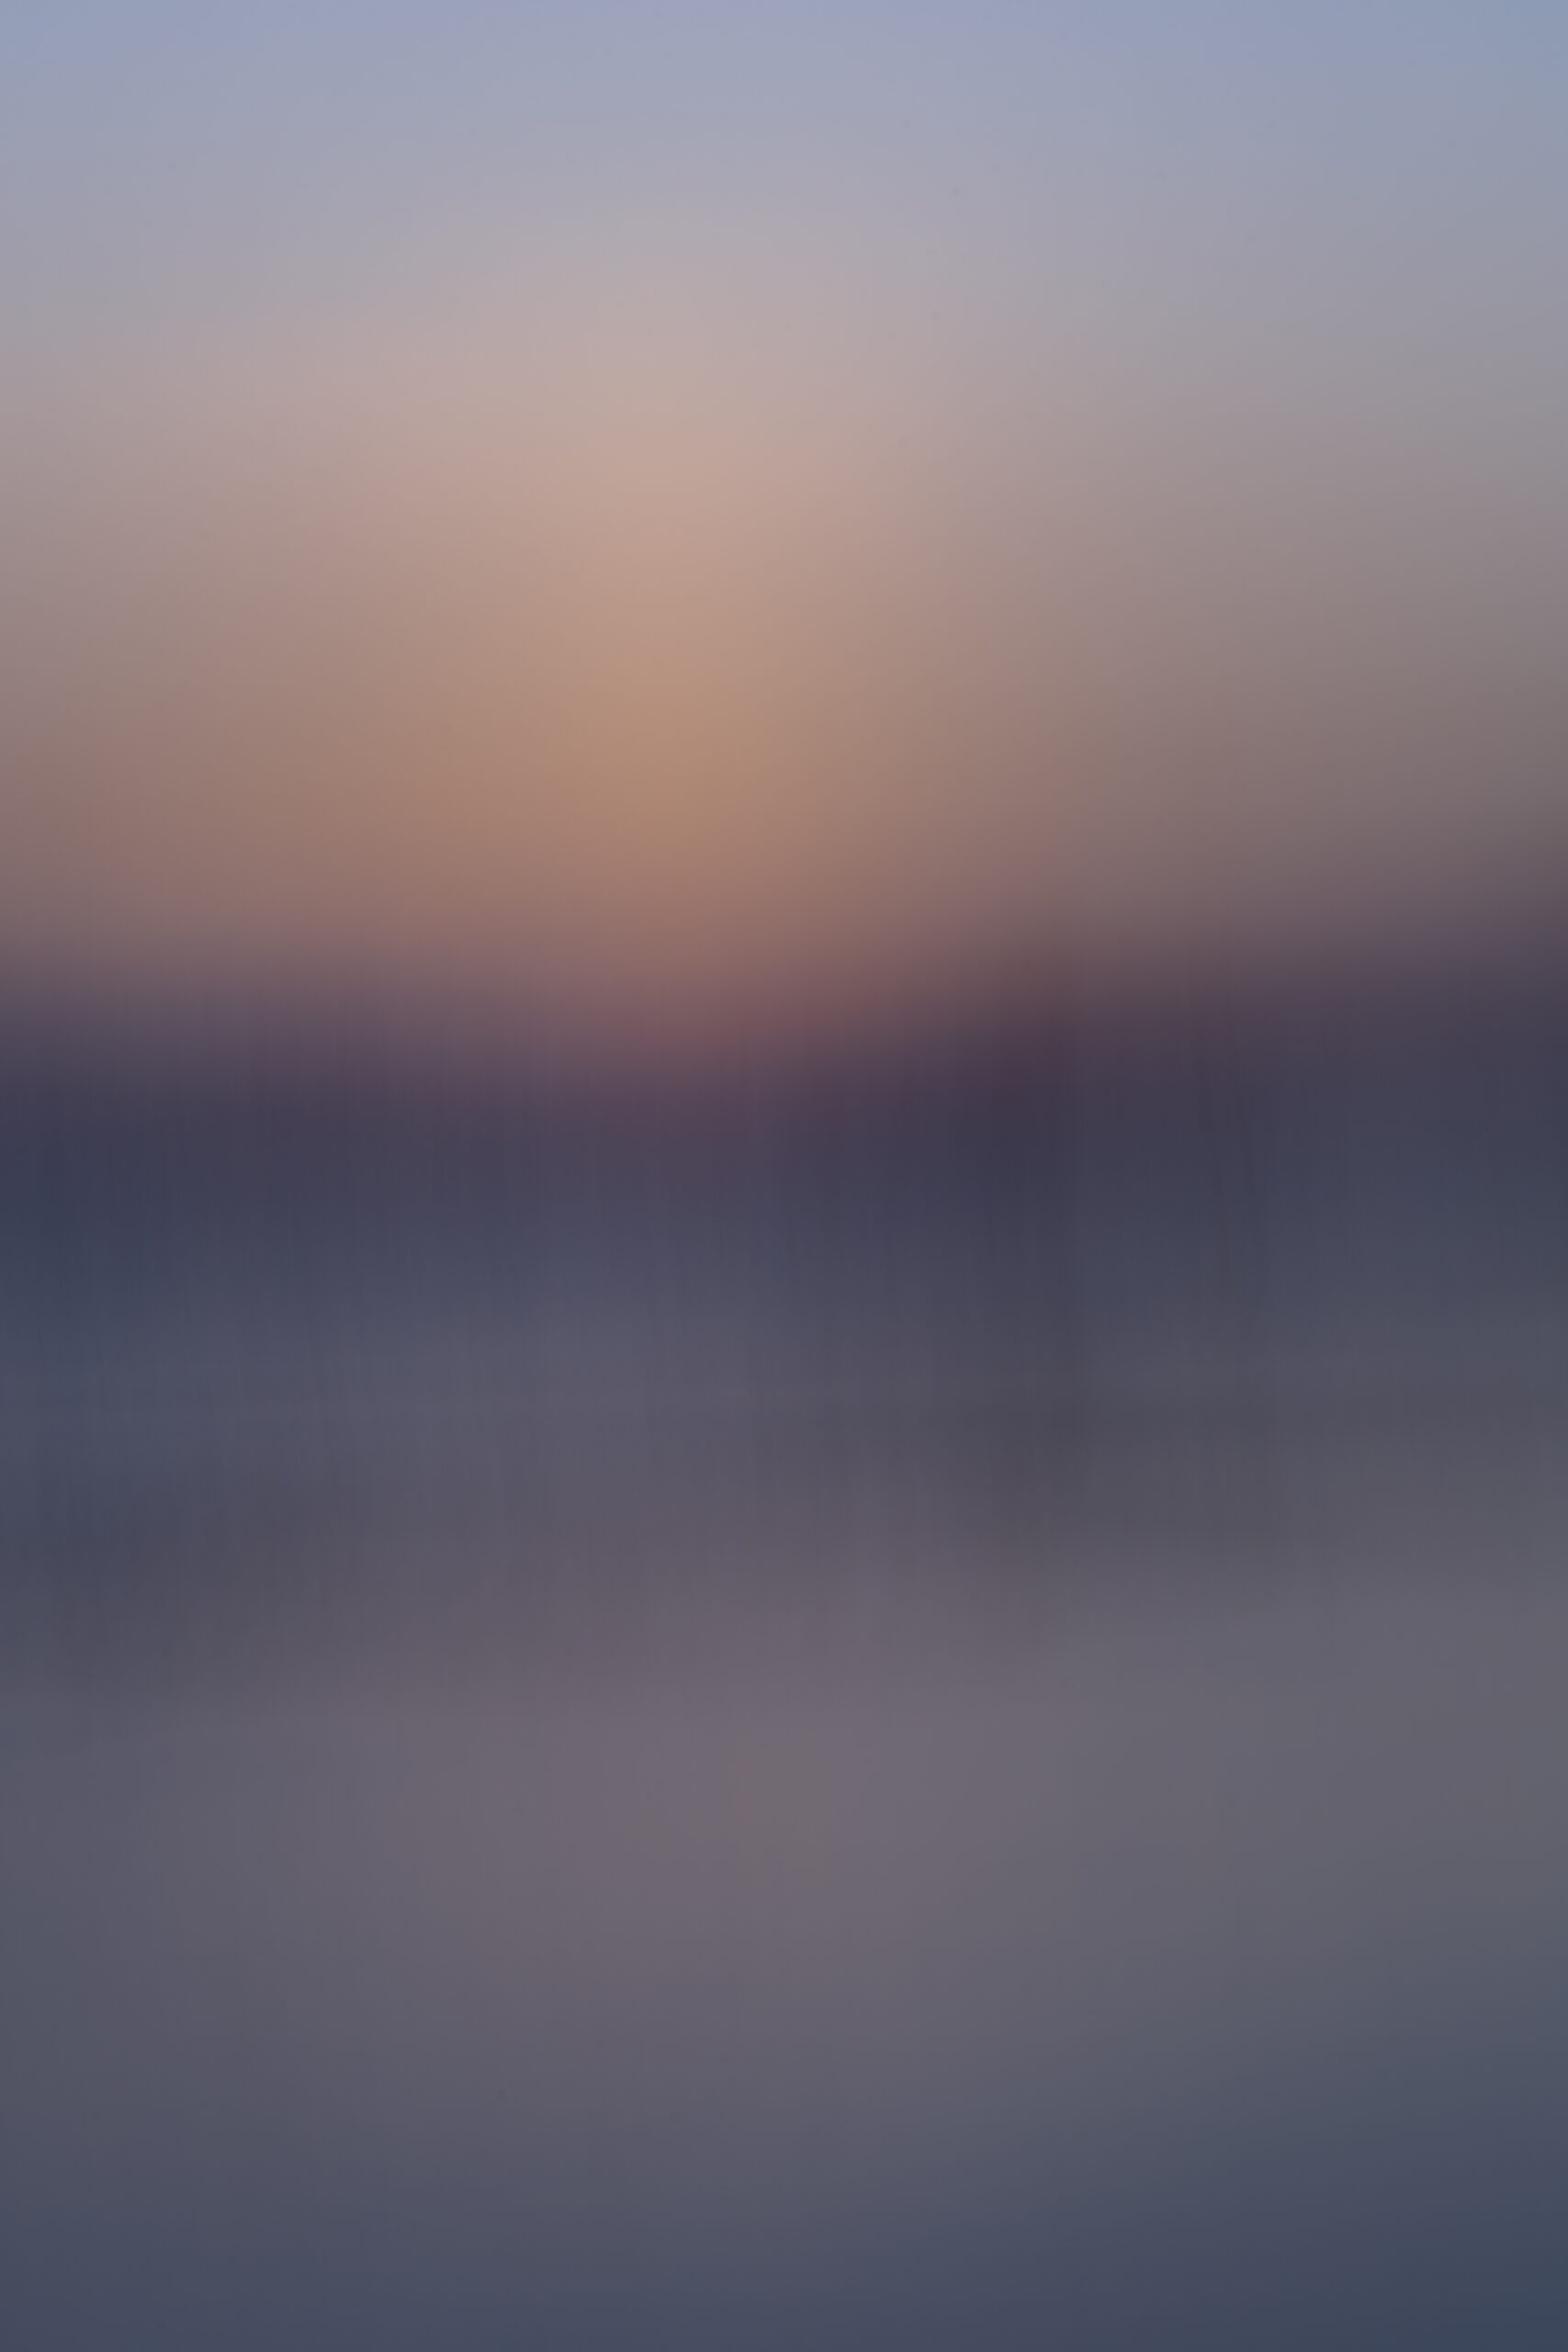 Costa Rica abstract photography by Juan Tribaldos where he has blurred the image of an ocean and soft light of either a sunrise or a sunset into complete dreamy abstraction.